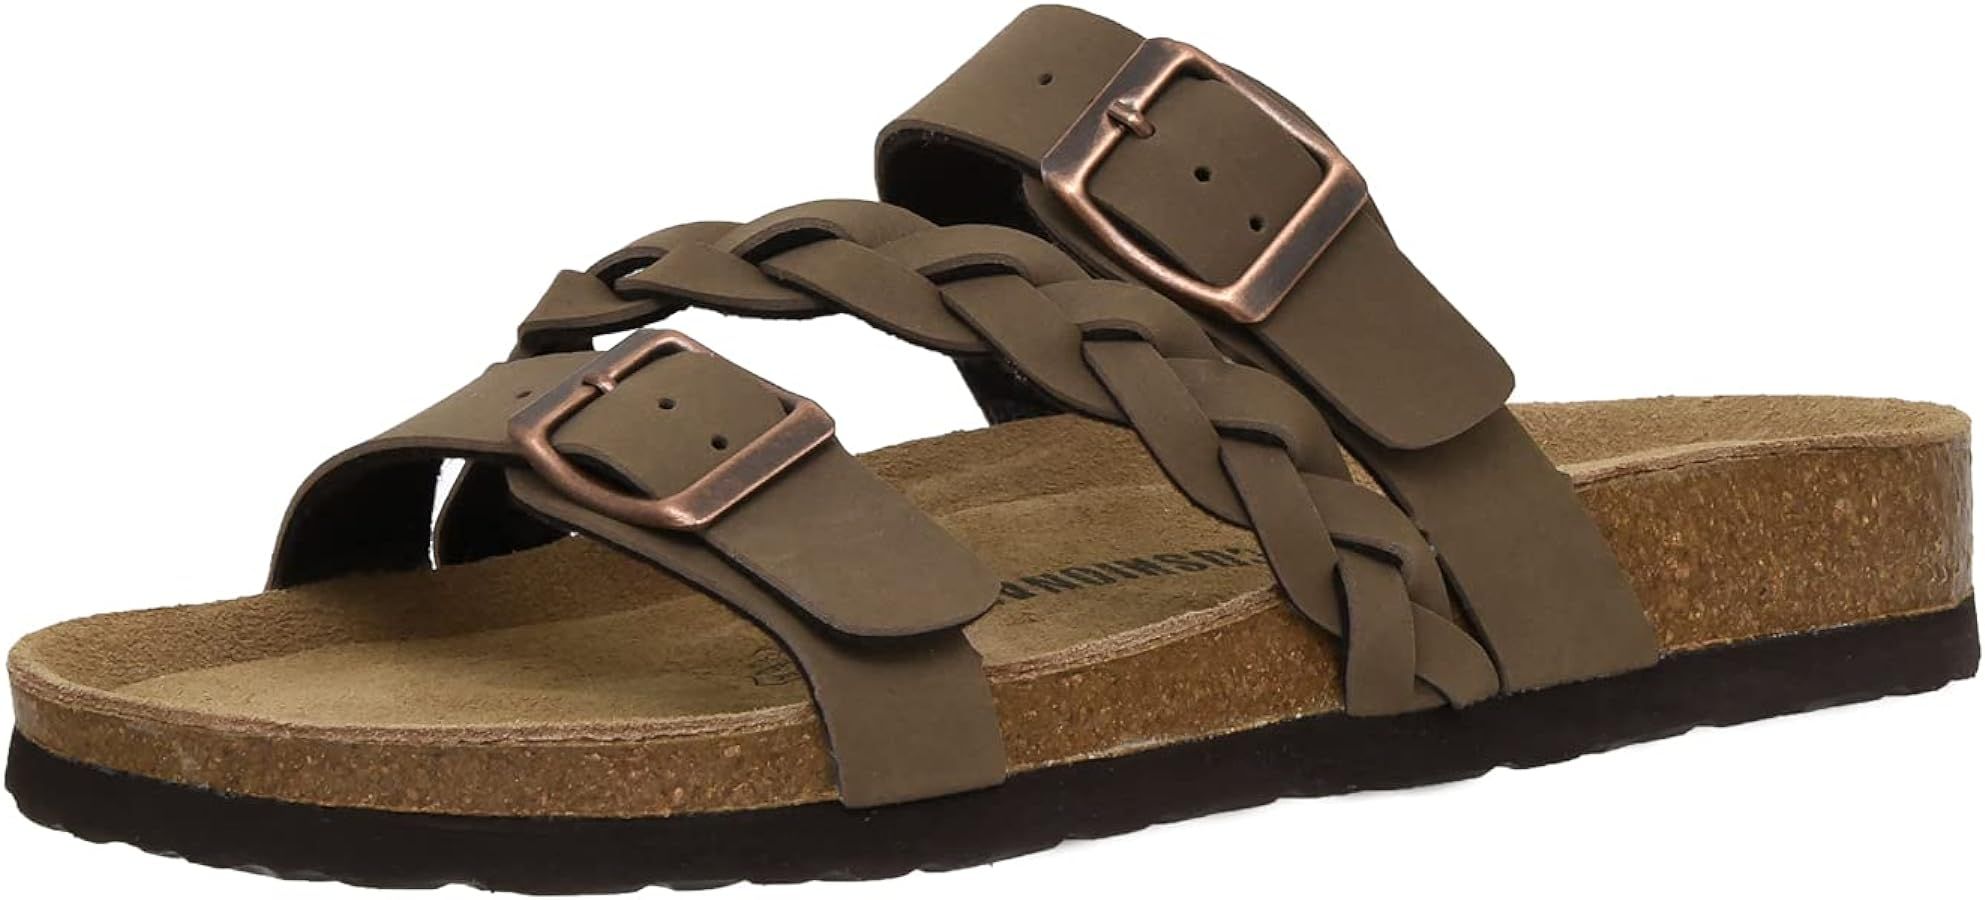 CUSHIONAIRE Women's Lizzy Cork footbed Sandal with +Comfort and Wide Widths Available | Amazon (US)